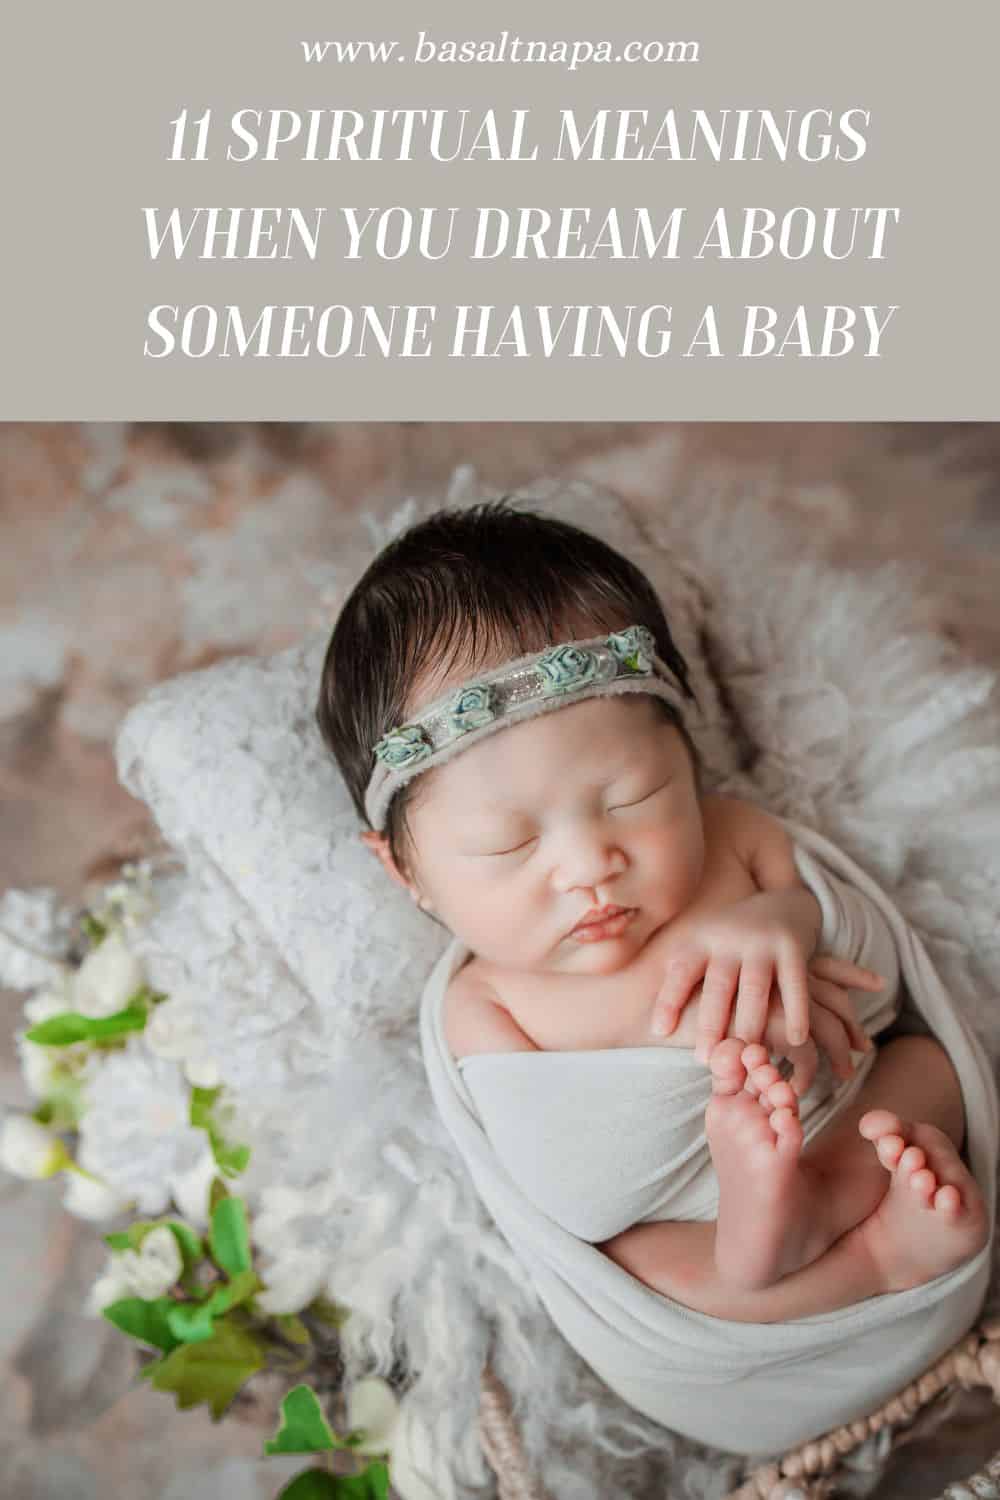 What Does It Mean When You Dream About Someone Having A Baby?